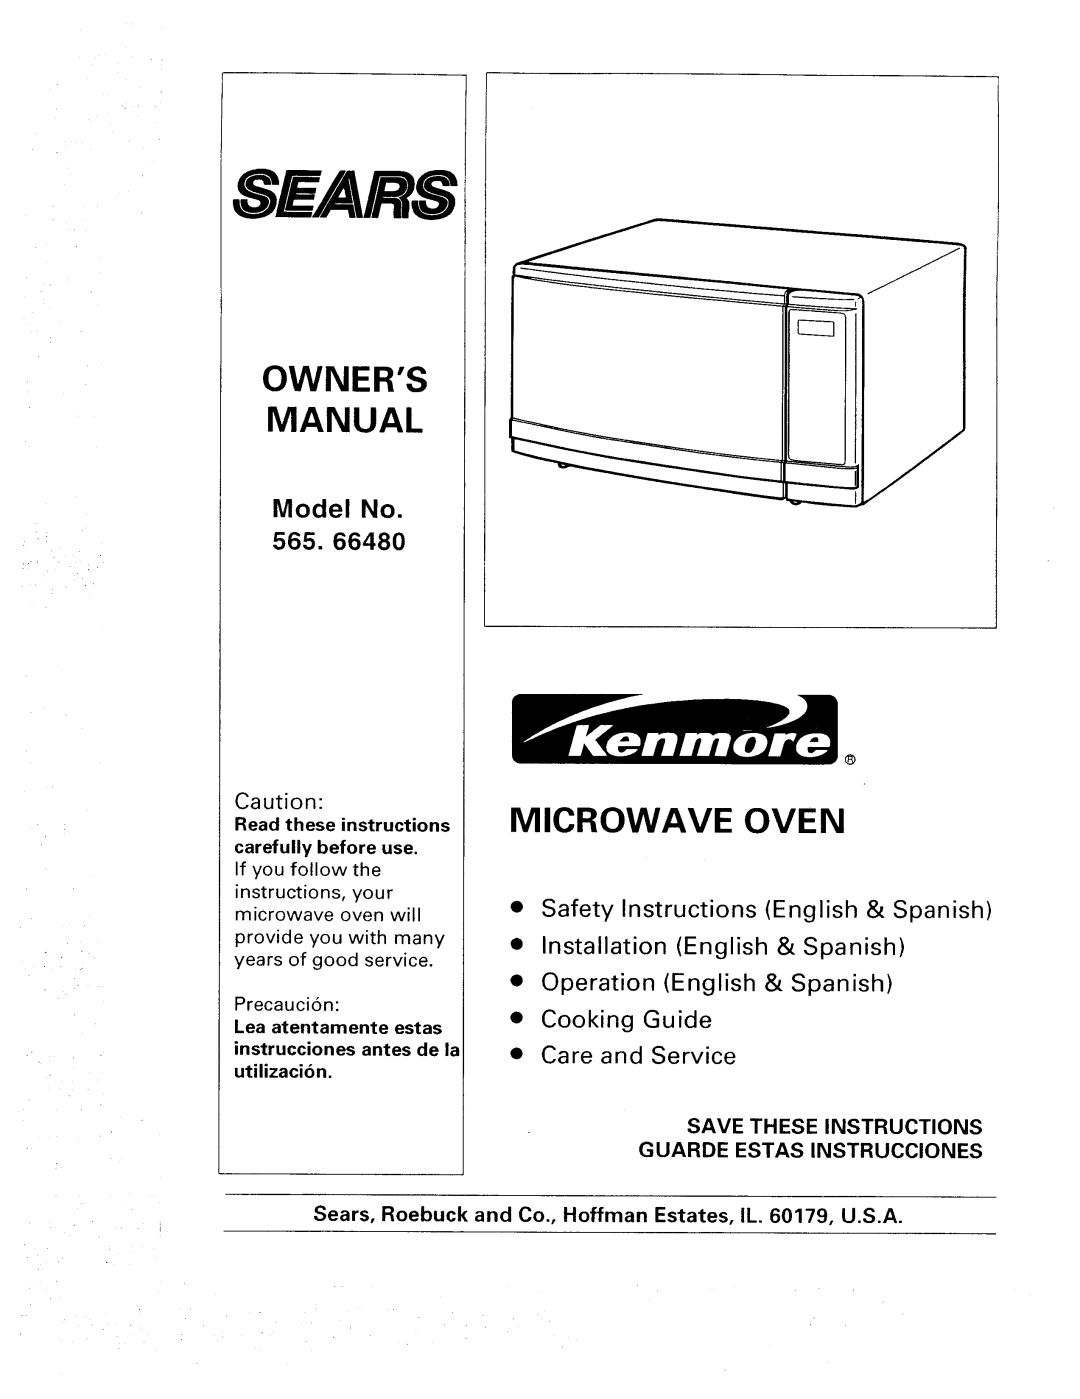 Sears 565. 66480 owner manual Owners Manual, Microwave Oven, Model No 565, Sears, • Safety Instructions English & Spanish 